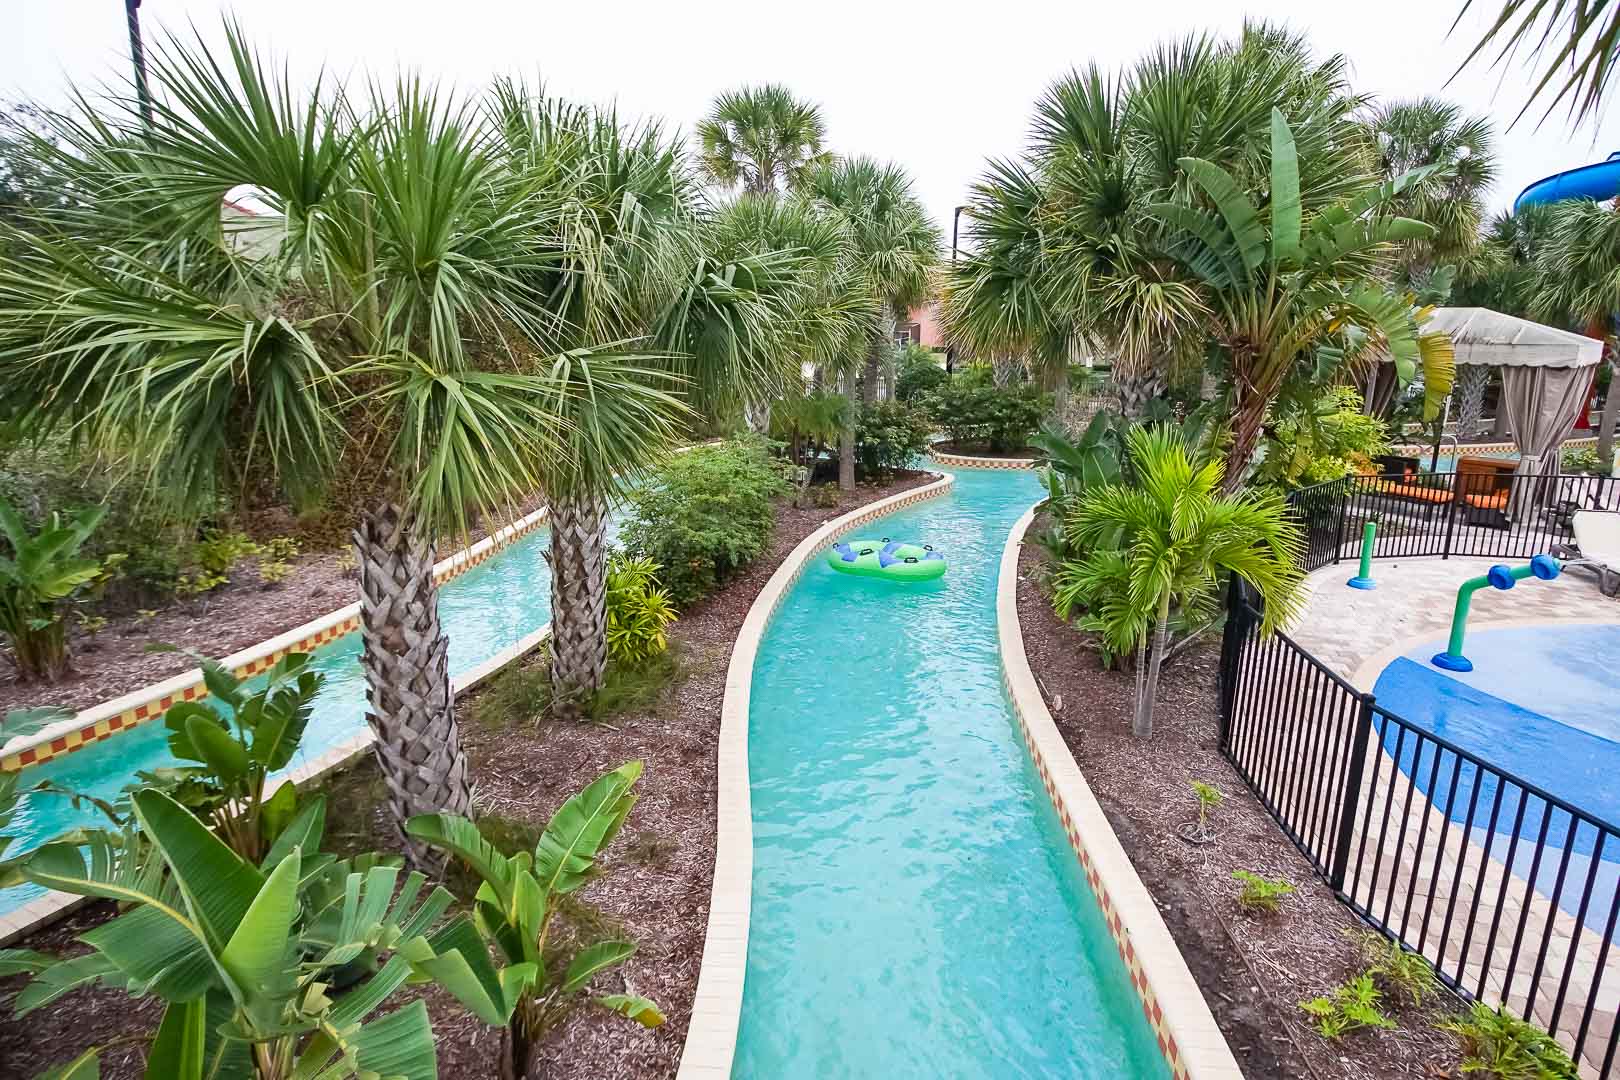 A relaxing view of the outdoor lazy river pool at VRI's Fantasy World Resort in Florida.